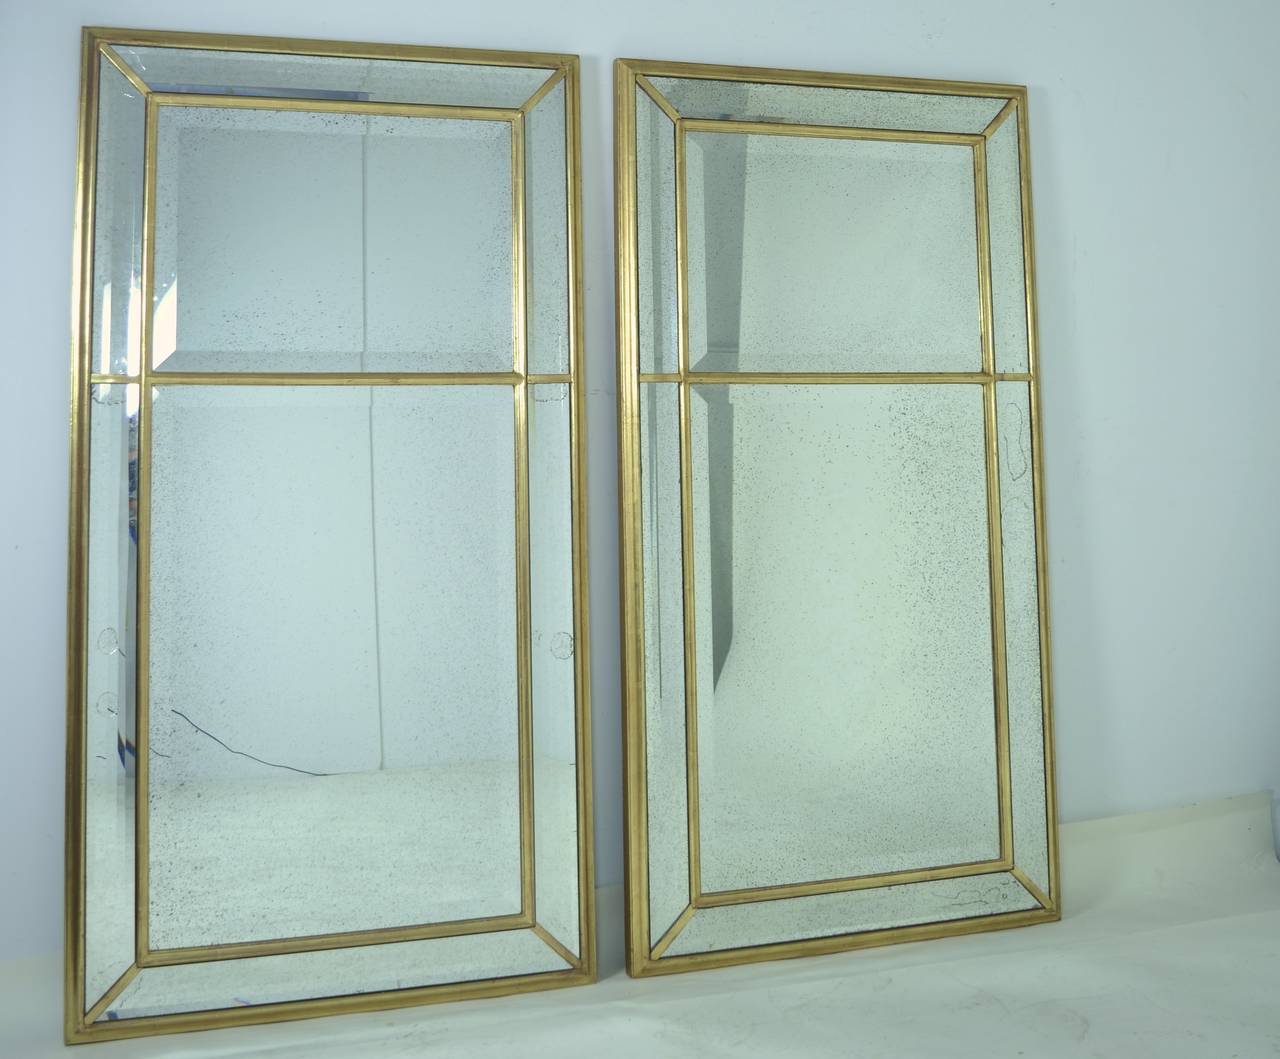 Part of the F. Schumacher Mirror line, this handsome pair of mirrors are super-fine quality. Beautifully water gilded with antiqued mirror glass and wide bevels. The surrounding mirror edges are faceted with multiple bevels.